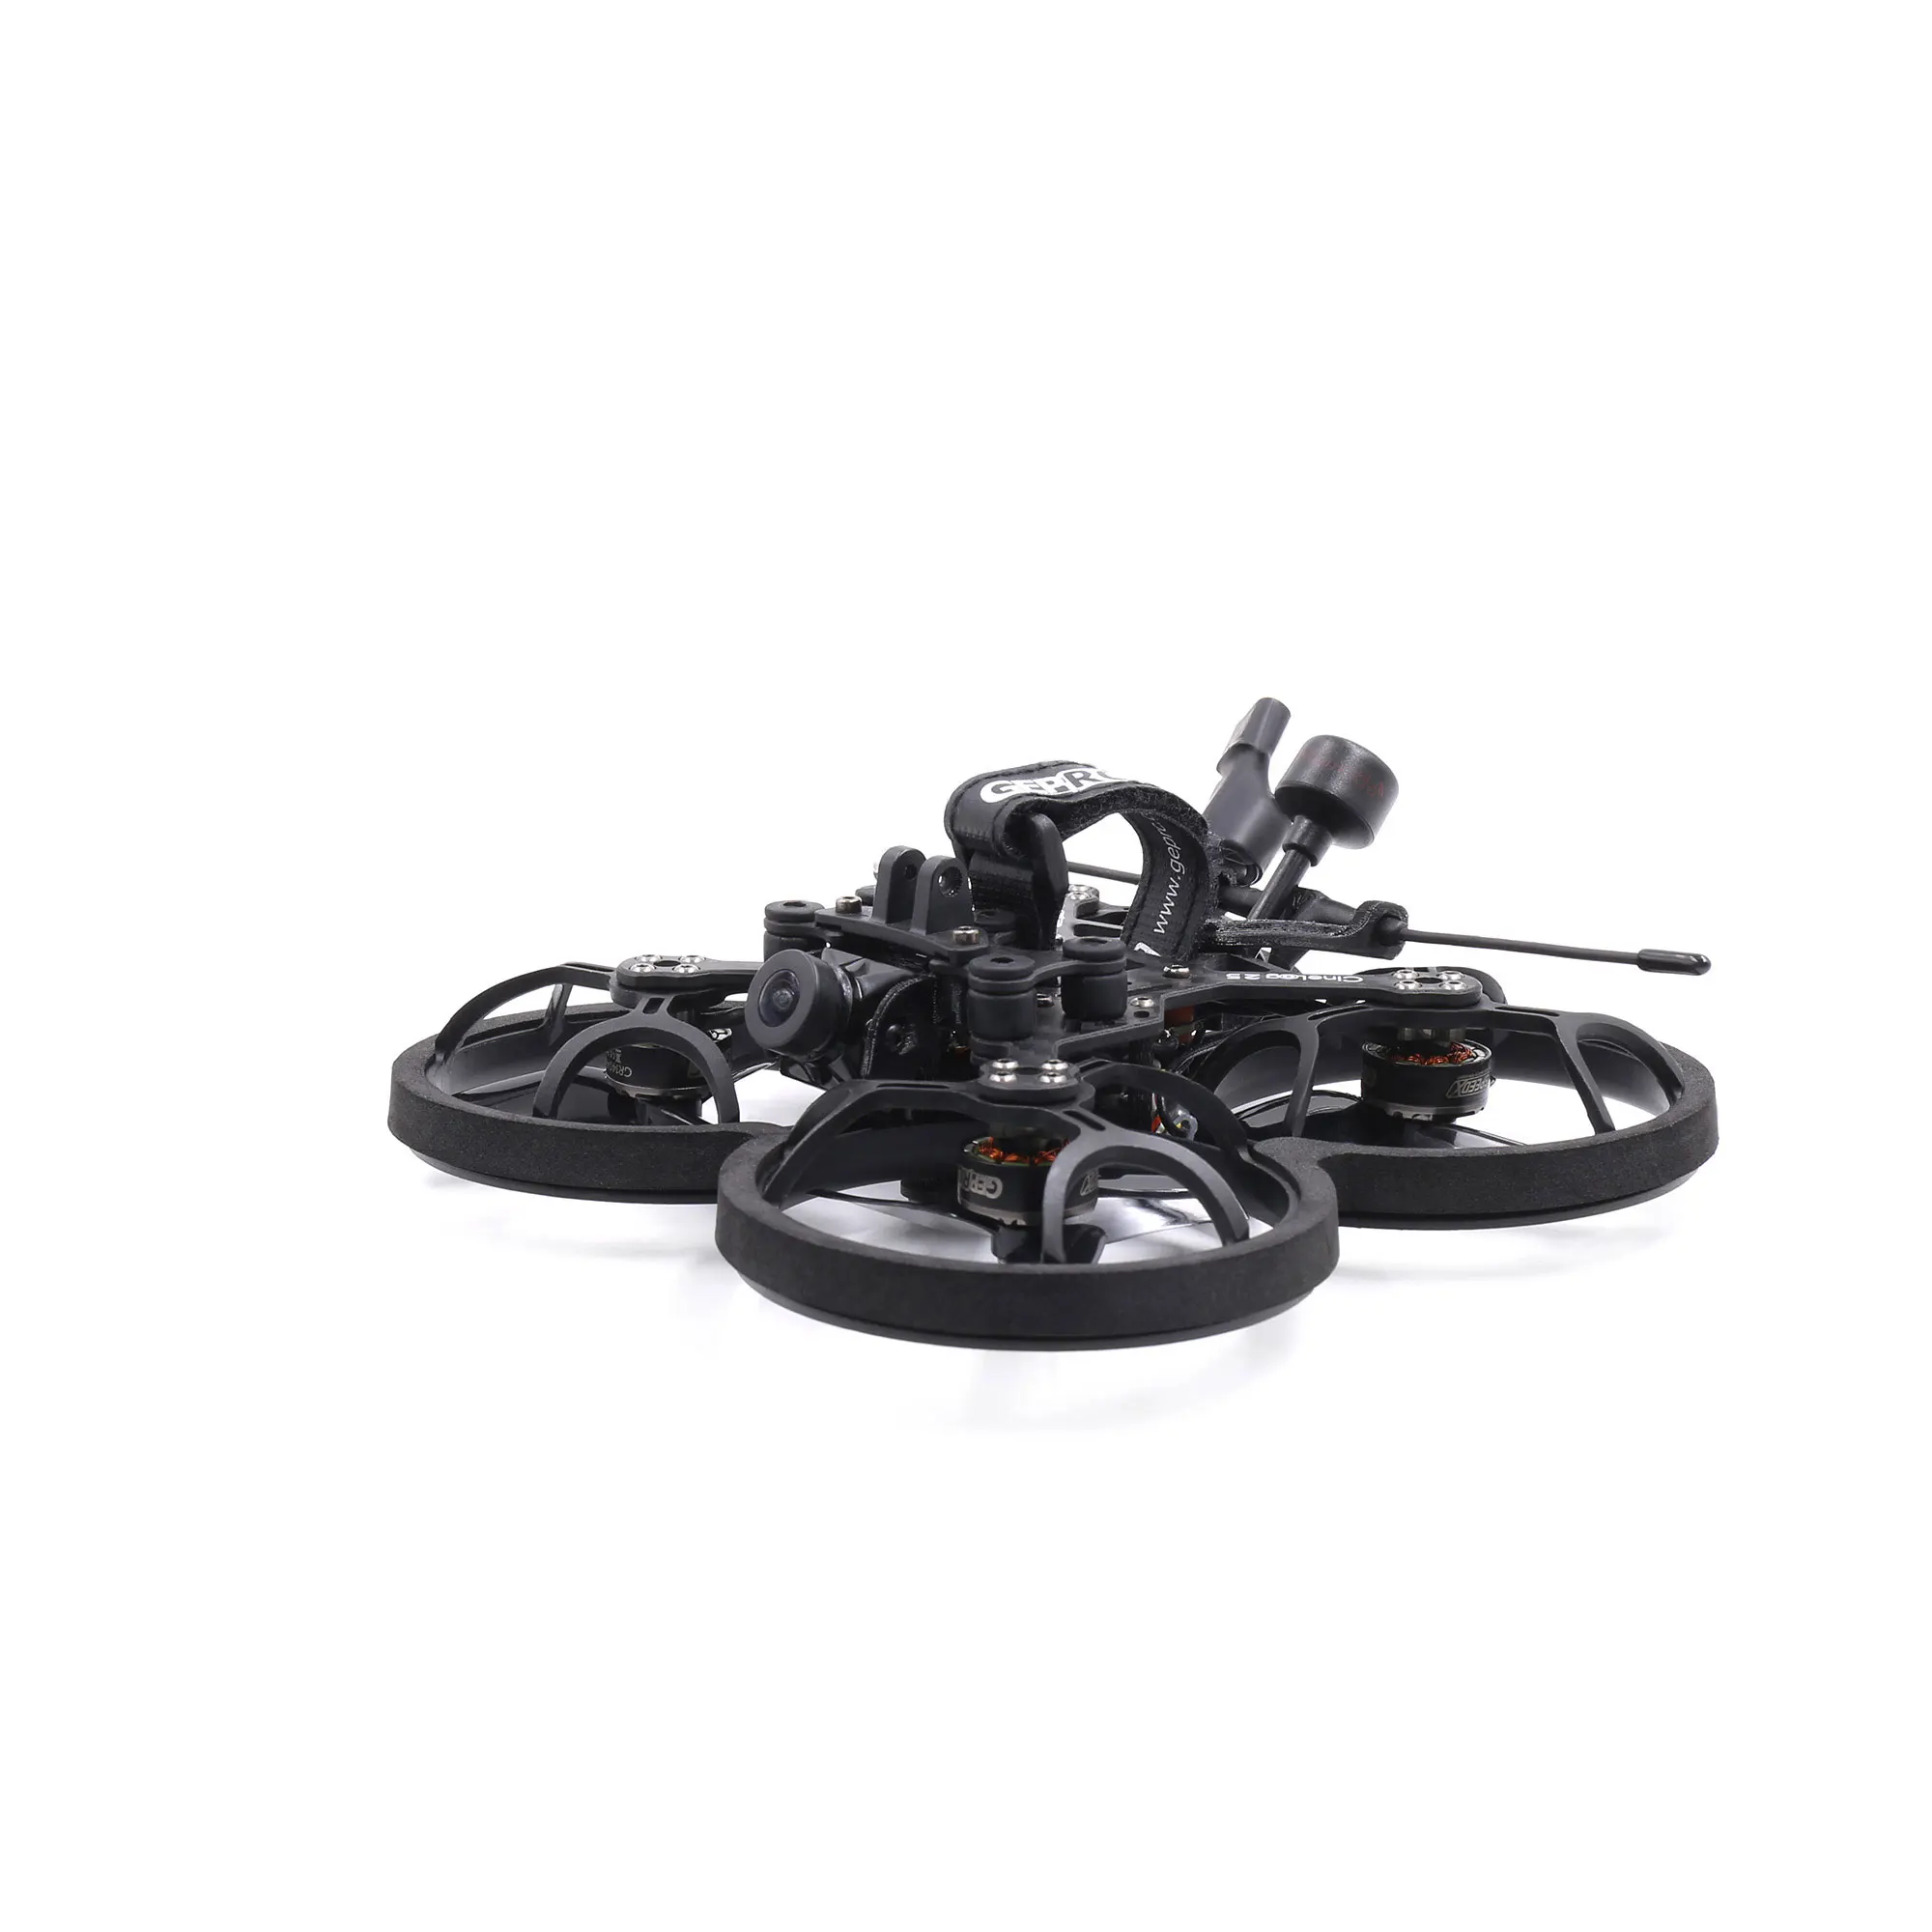 2021 Drone GEPRC CineLog 25 Analog/HD Polar CineWhoop Drone GEP-20A-F4 FC GR1404 4500kv For RC FPV Quadcopter